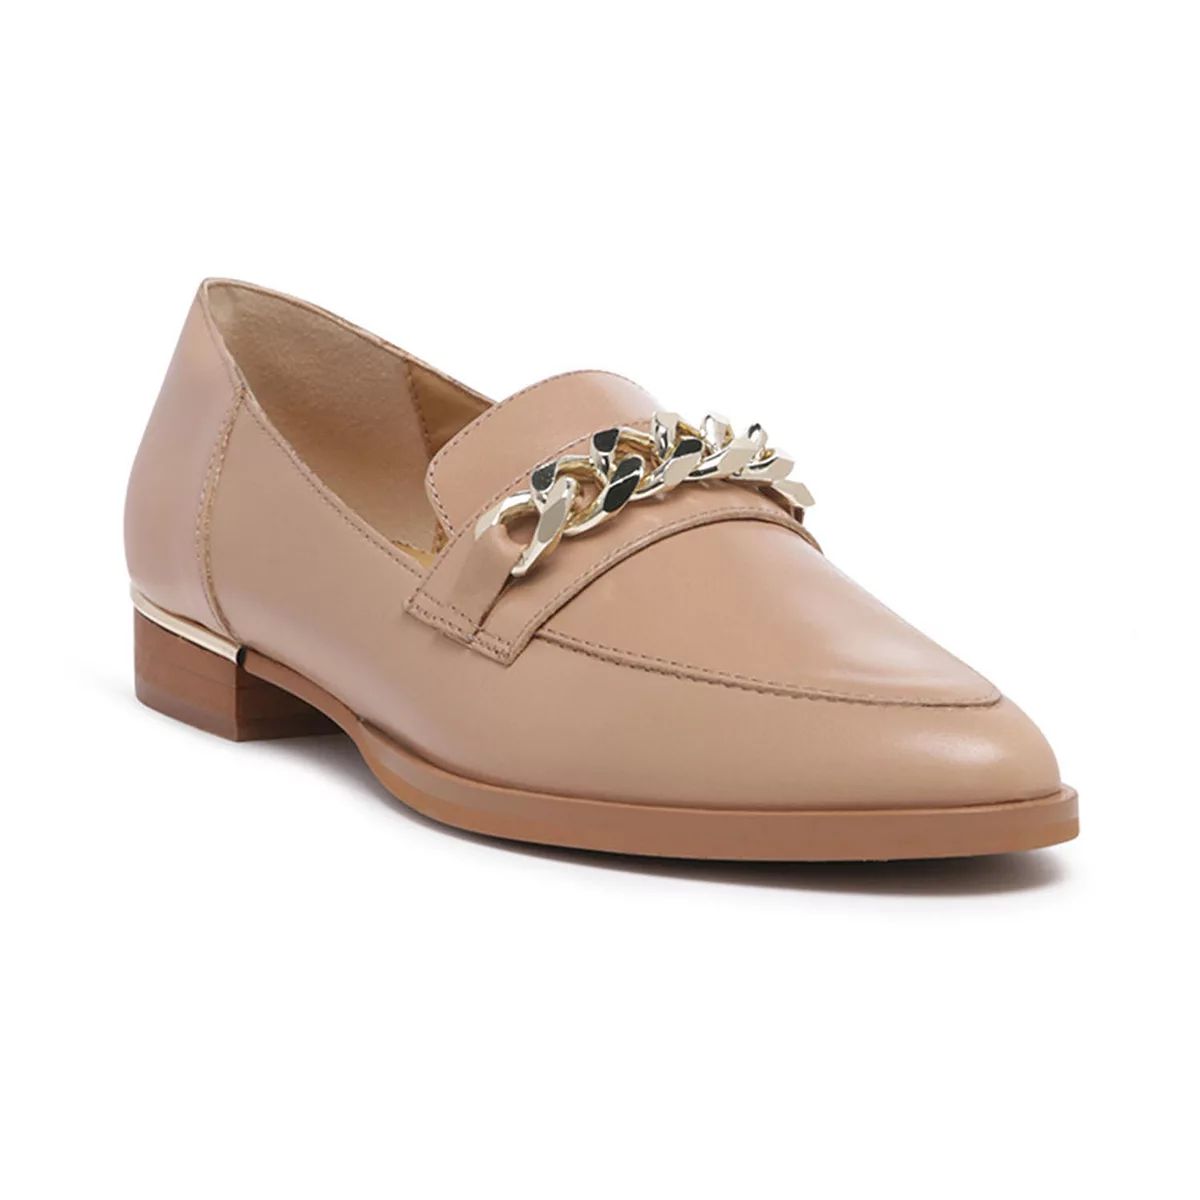 Rag & Co Pola Women's Leather Chain Link Loafers | Kohl's